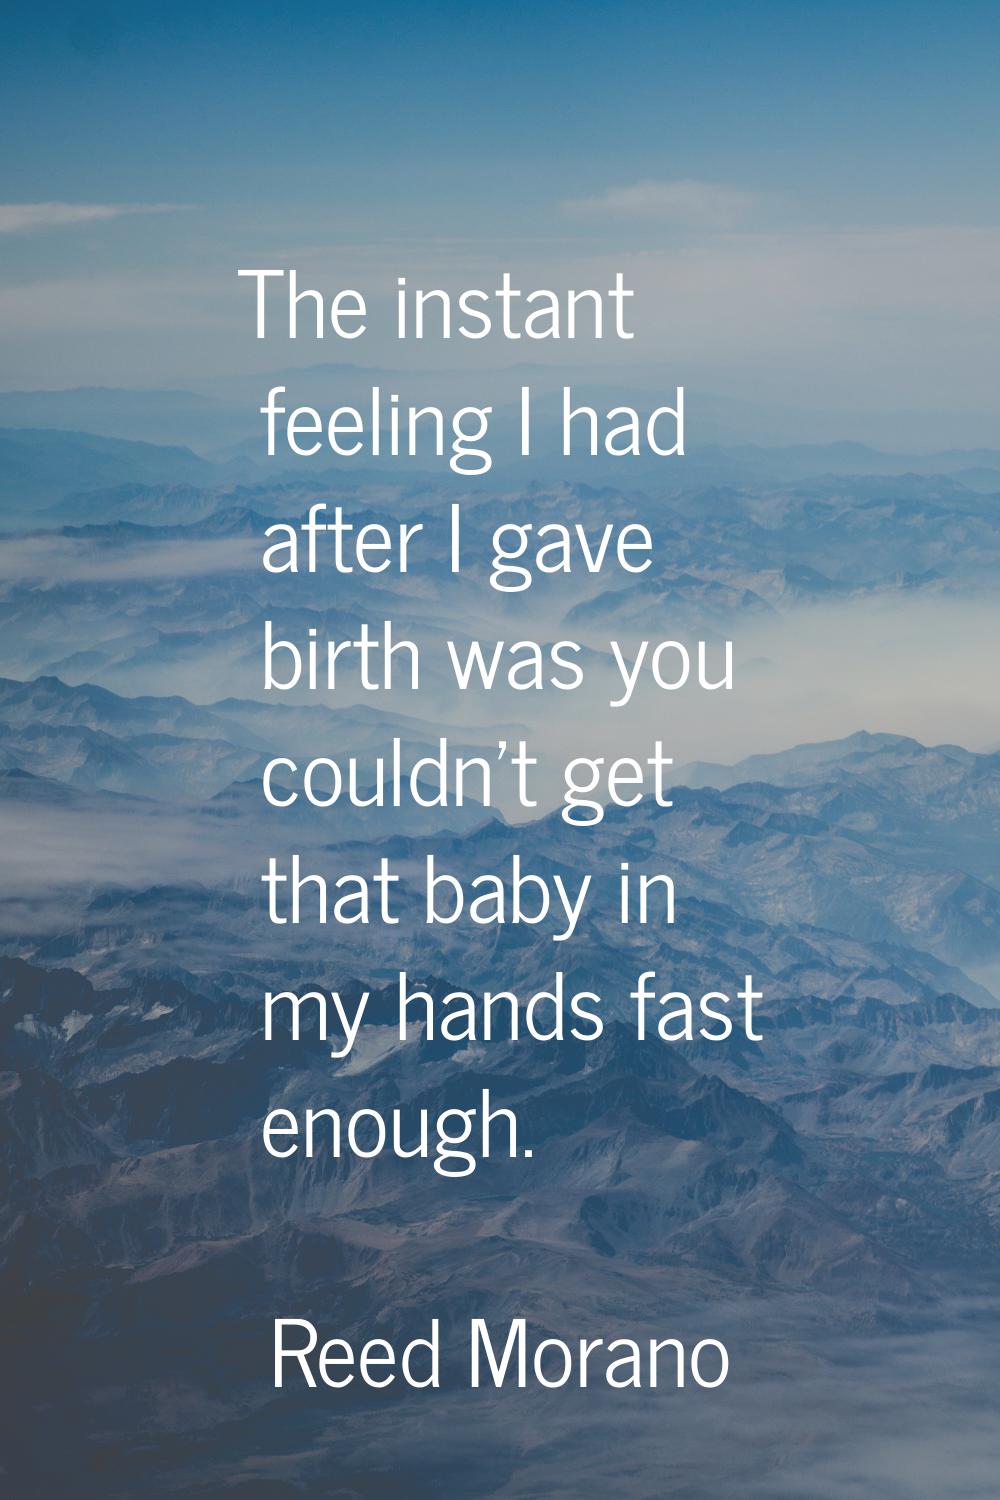 The instant feeling I had after I gave birth was you couldn't get that baby in my hands fast enough